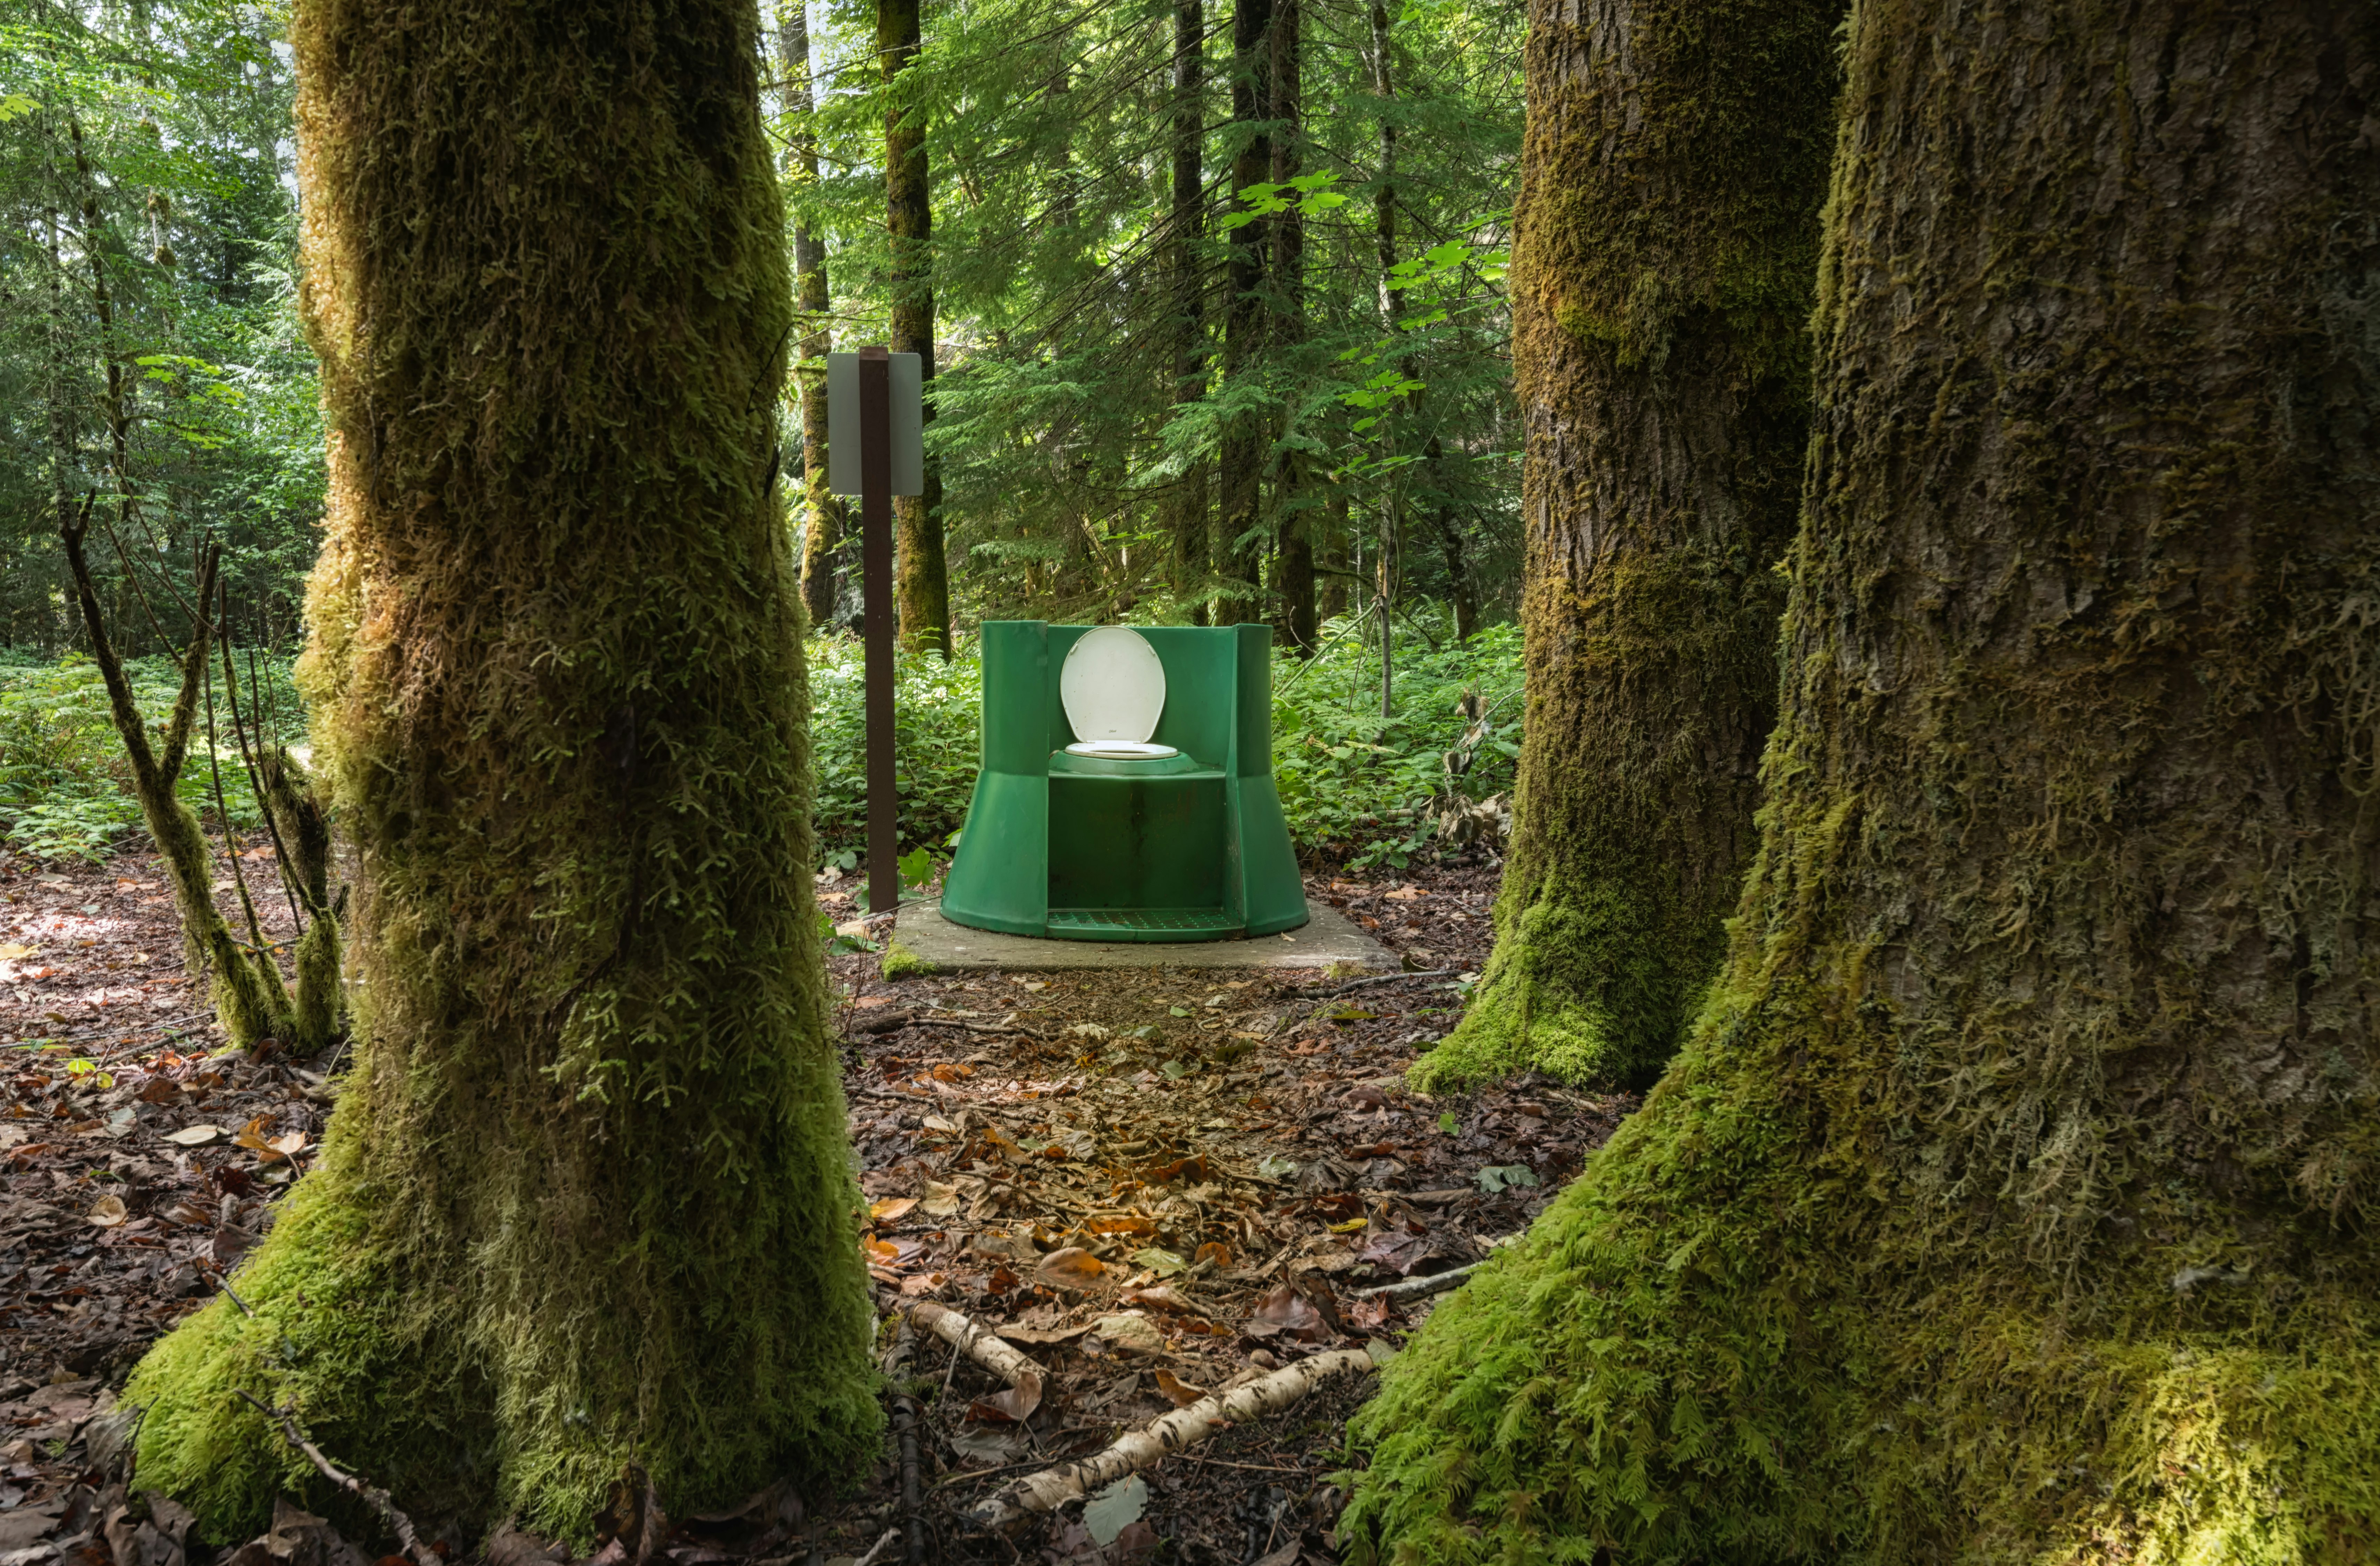 A toilet surrounded by mossy trees